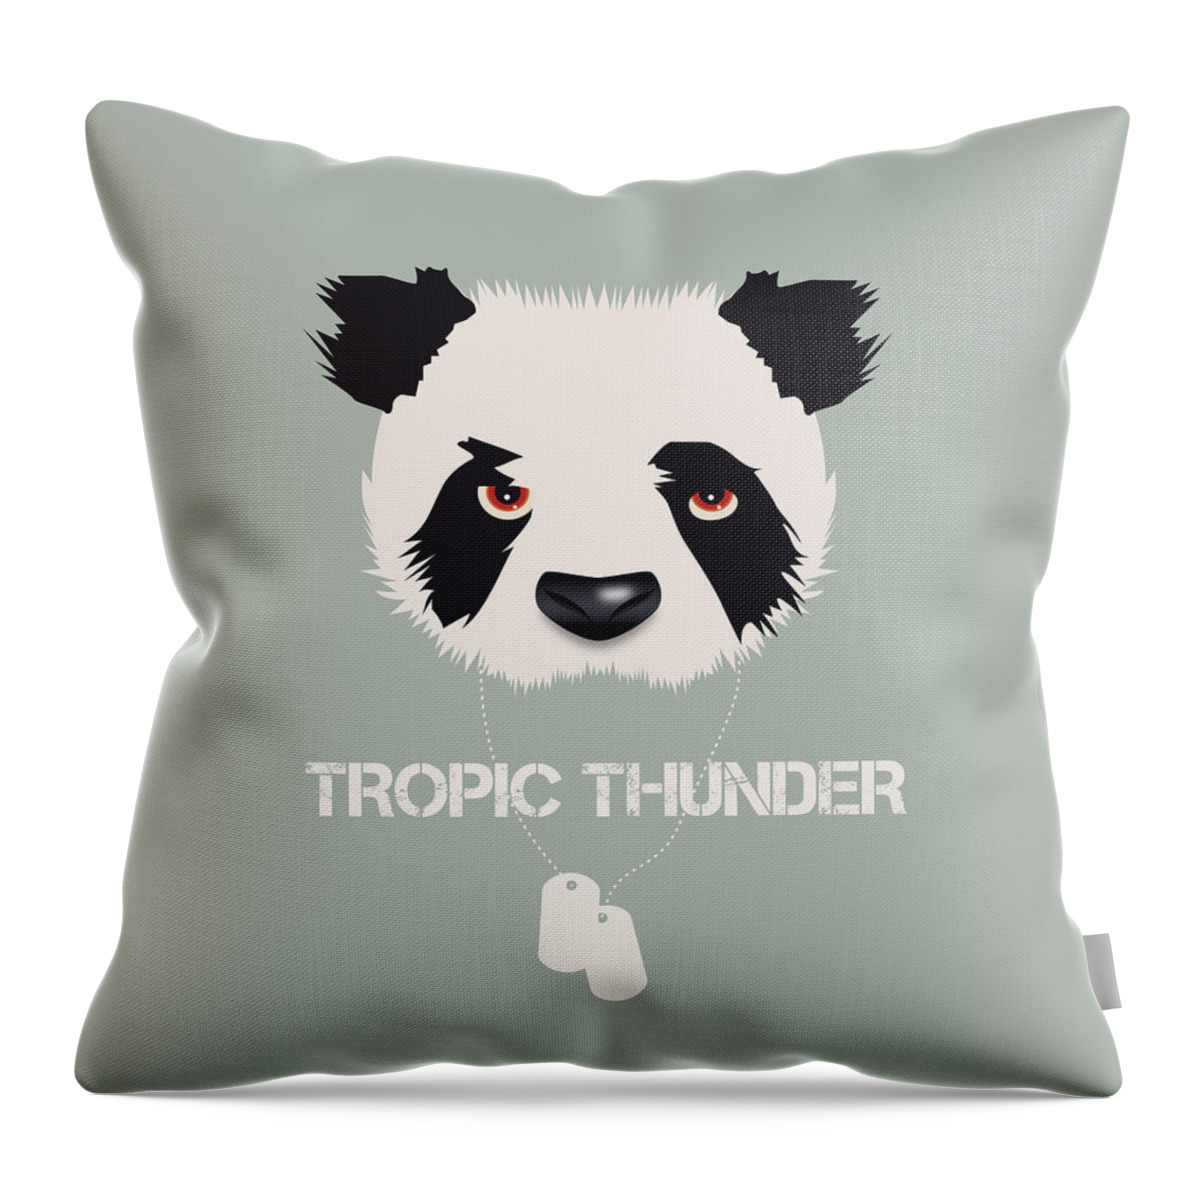 Movie Poster Throw Pillow featuring the digital art Tropic Thunder - Alternative Movie Poster by Movie Poster Boy